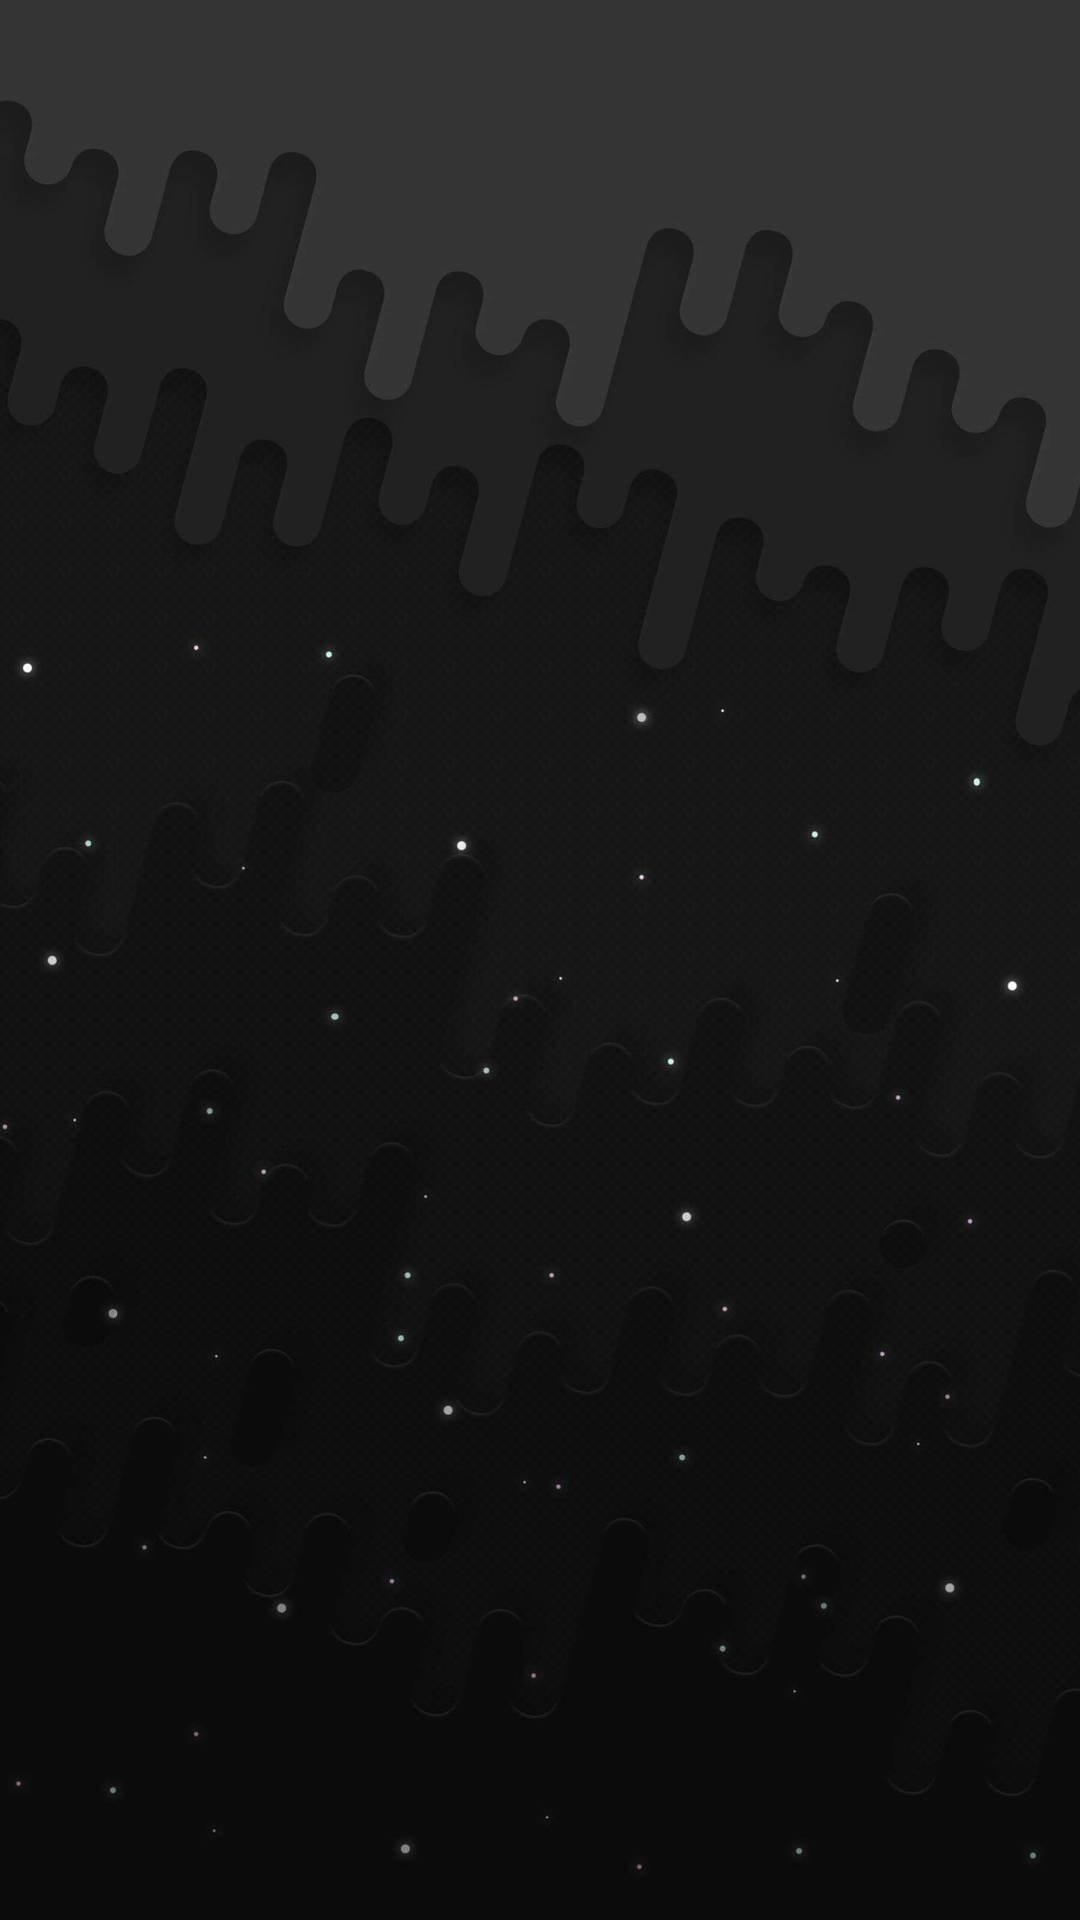 Blank Black With Sparkles And Drip Design Wallpaper